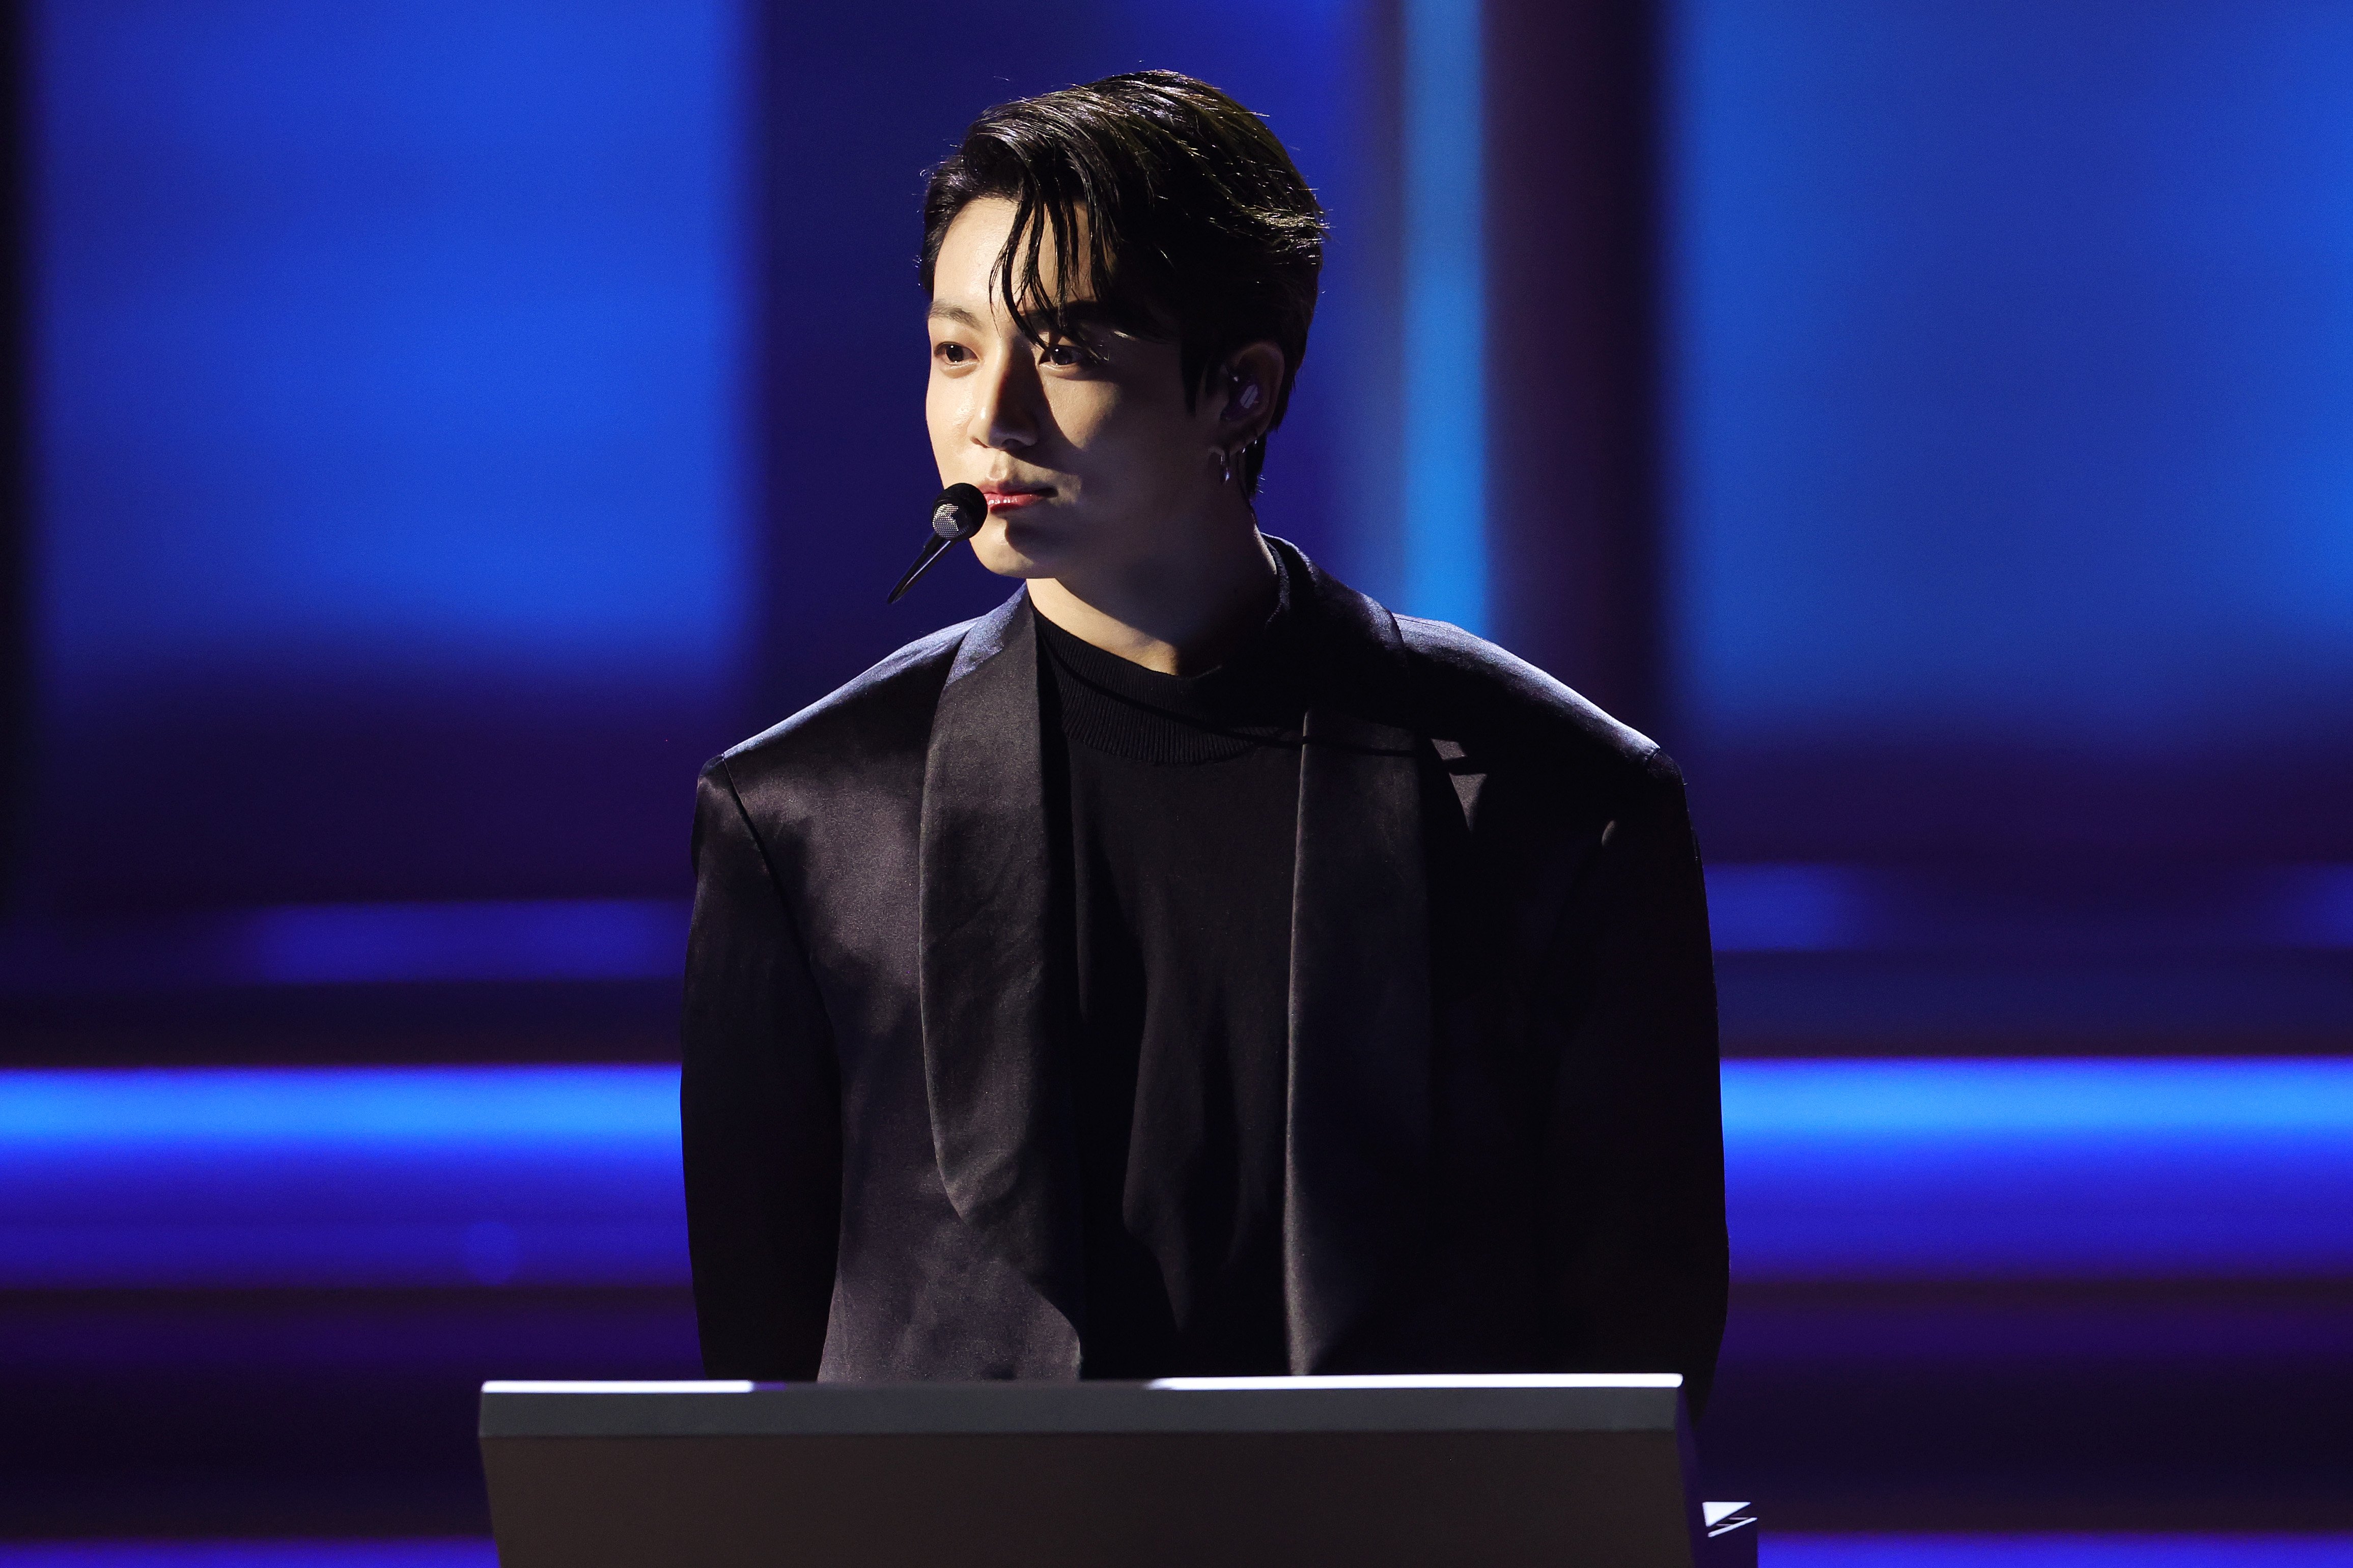 Jungkook of BTS onstage at the 2022 Grammy Awards